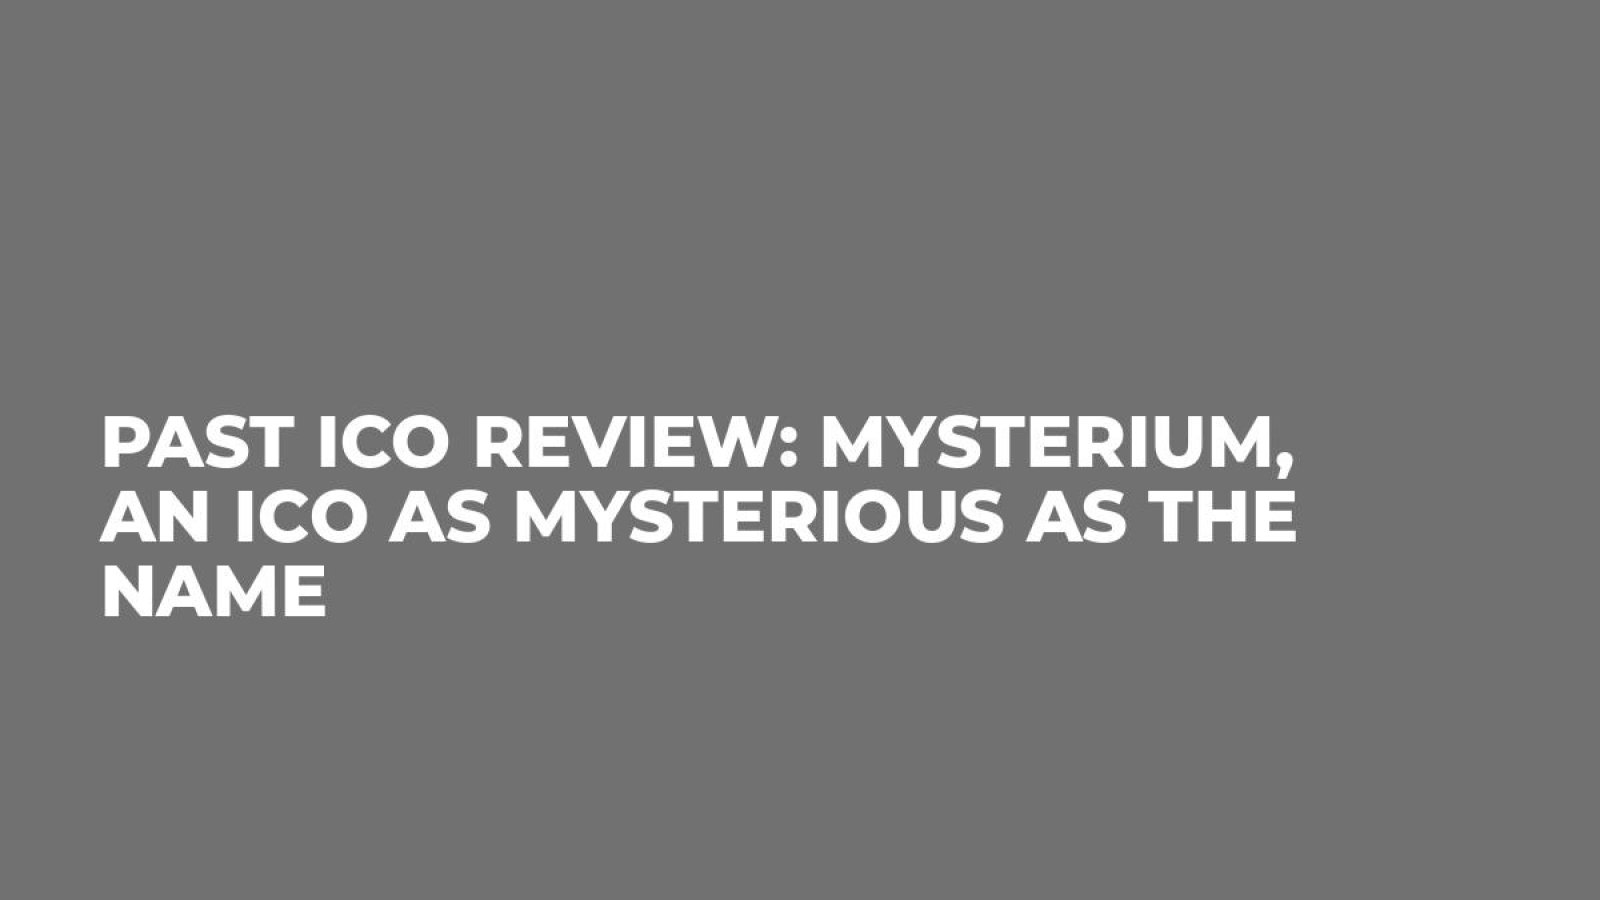 Past ICO Review: Mysterium, an ICO as Mysterious as the Name